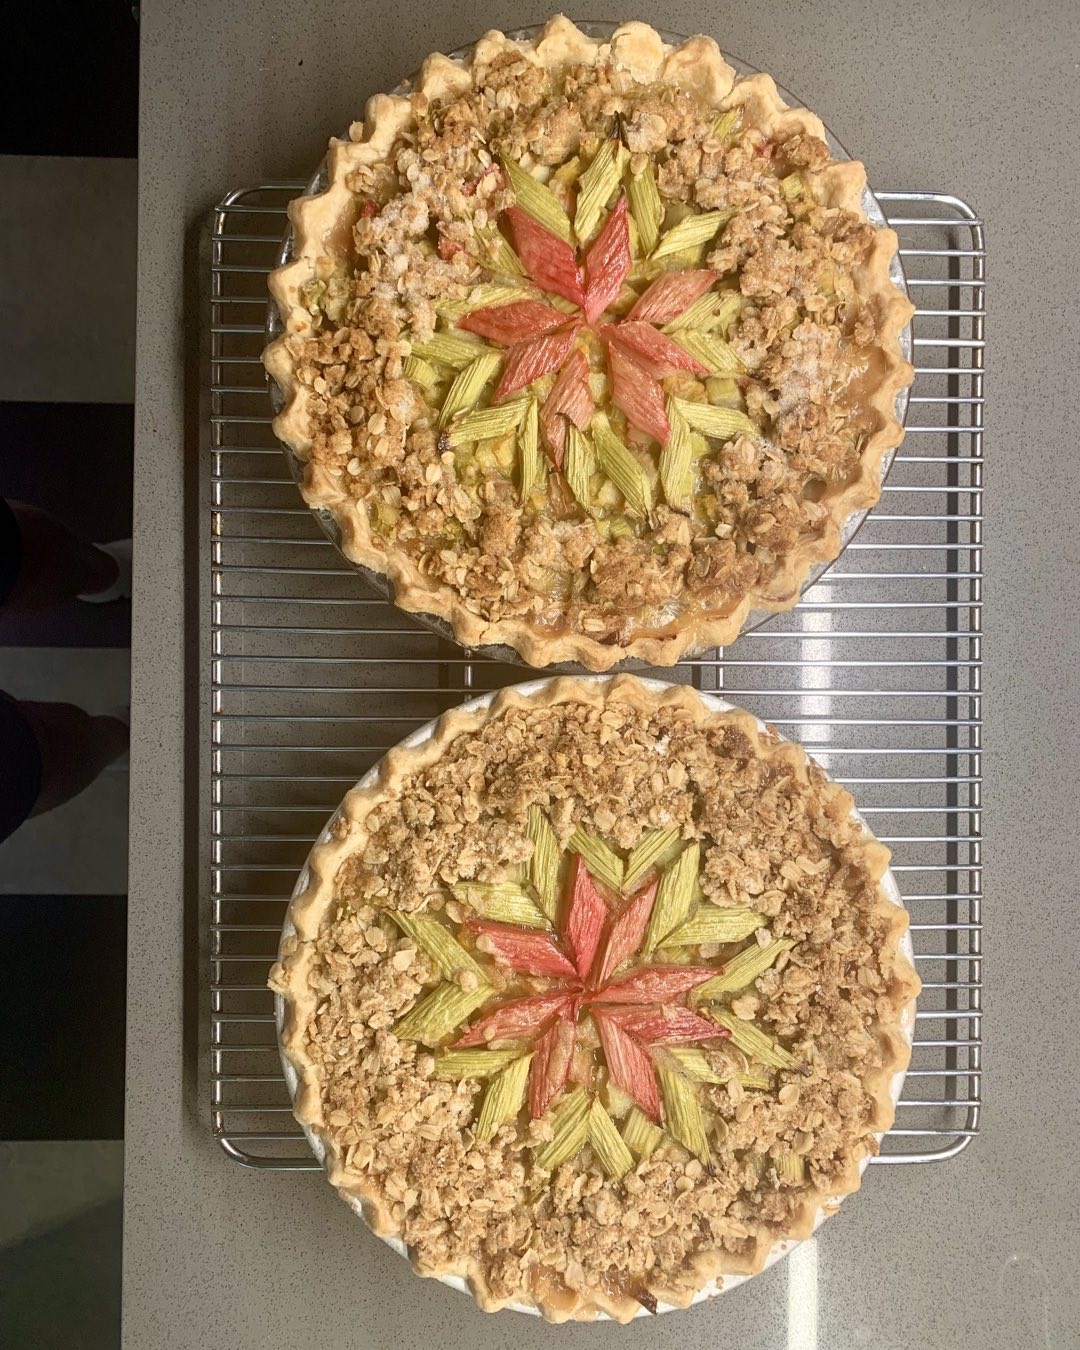 Rhubarb pies made by Cindy Orcutt in Kingfield, Maine. Essential ingredient from the neighborhood patch. #rhubarbpies #kingfieldmaine #orcuttphotography #neighborhoodrhubarbpatch